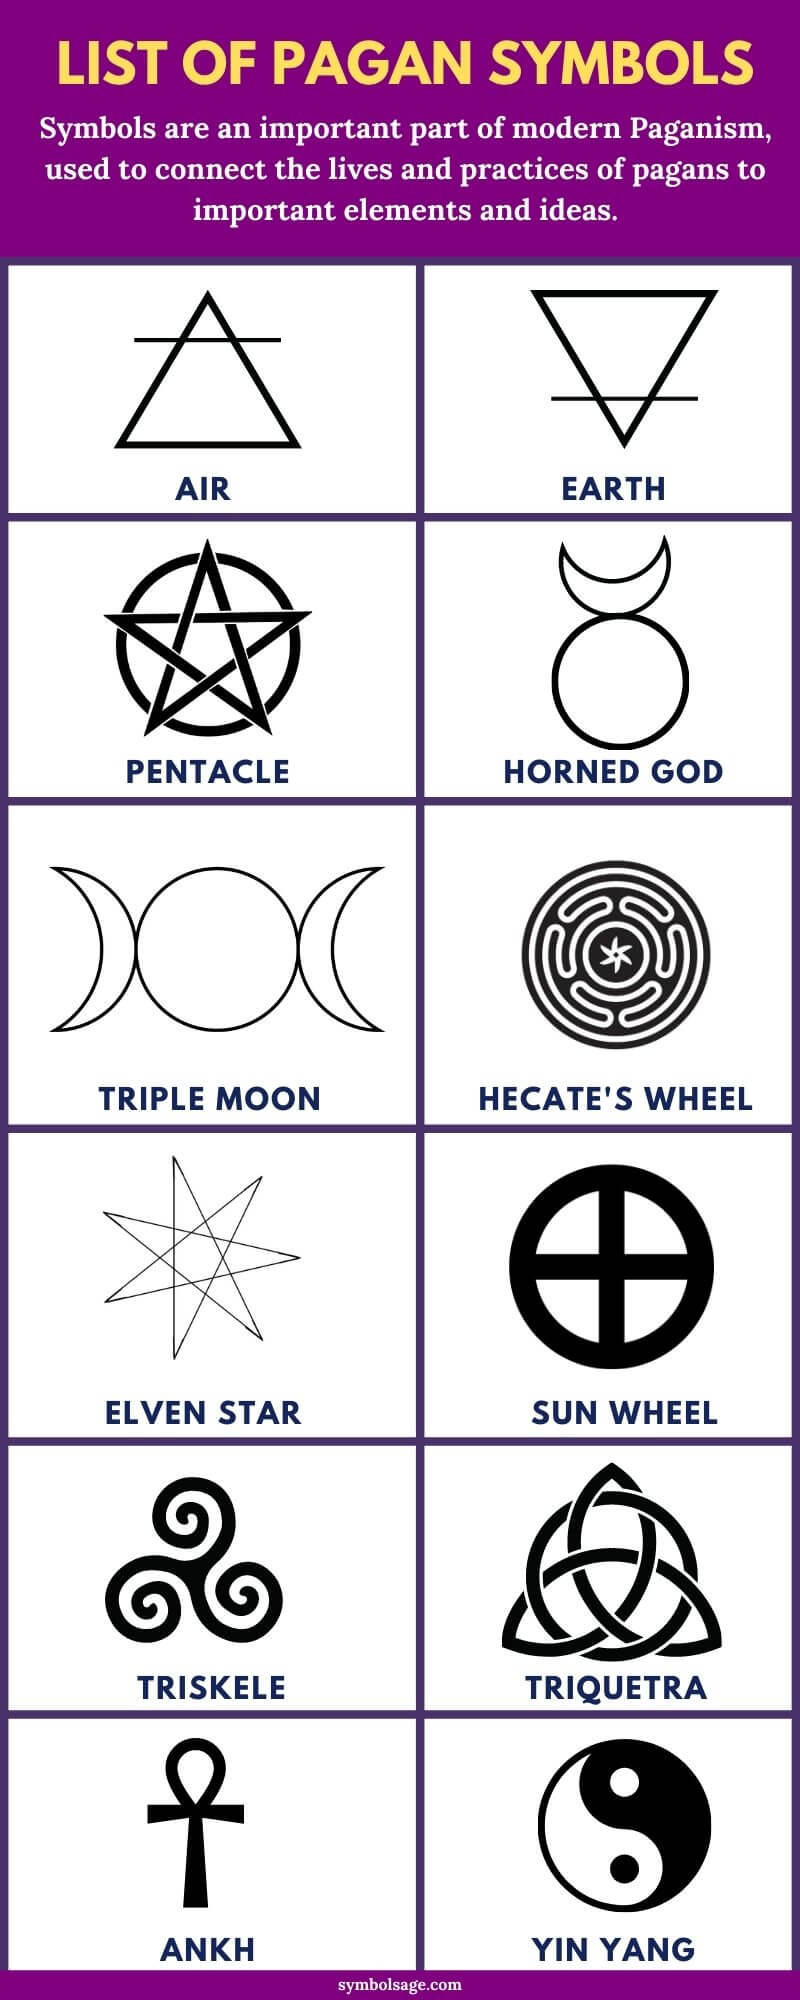 Top 12 Pagan Symbols & Their Meaning – Why They're Popular